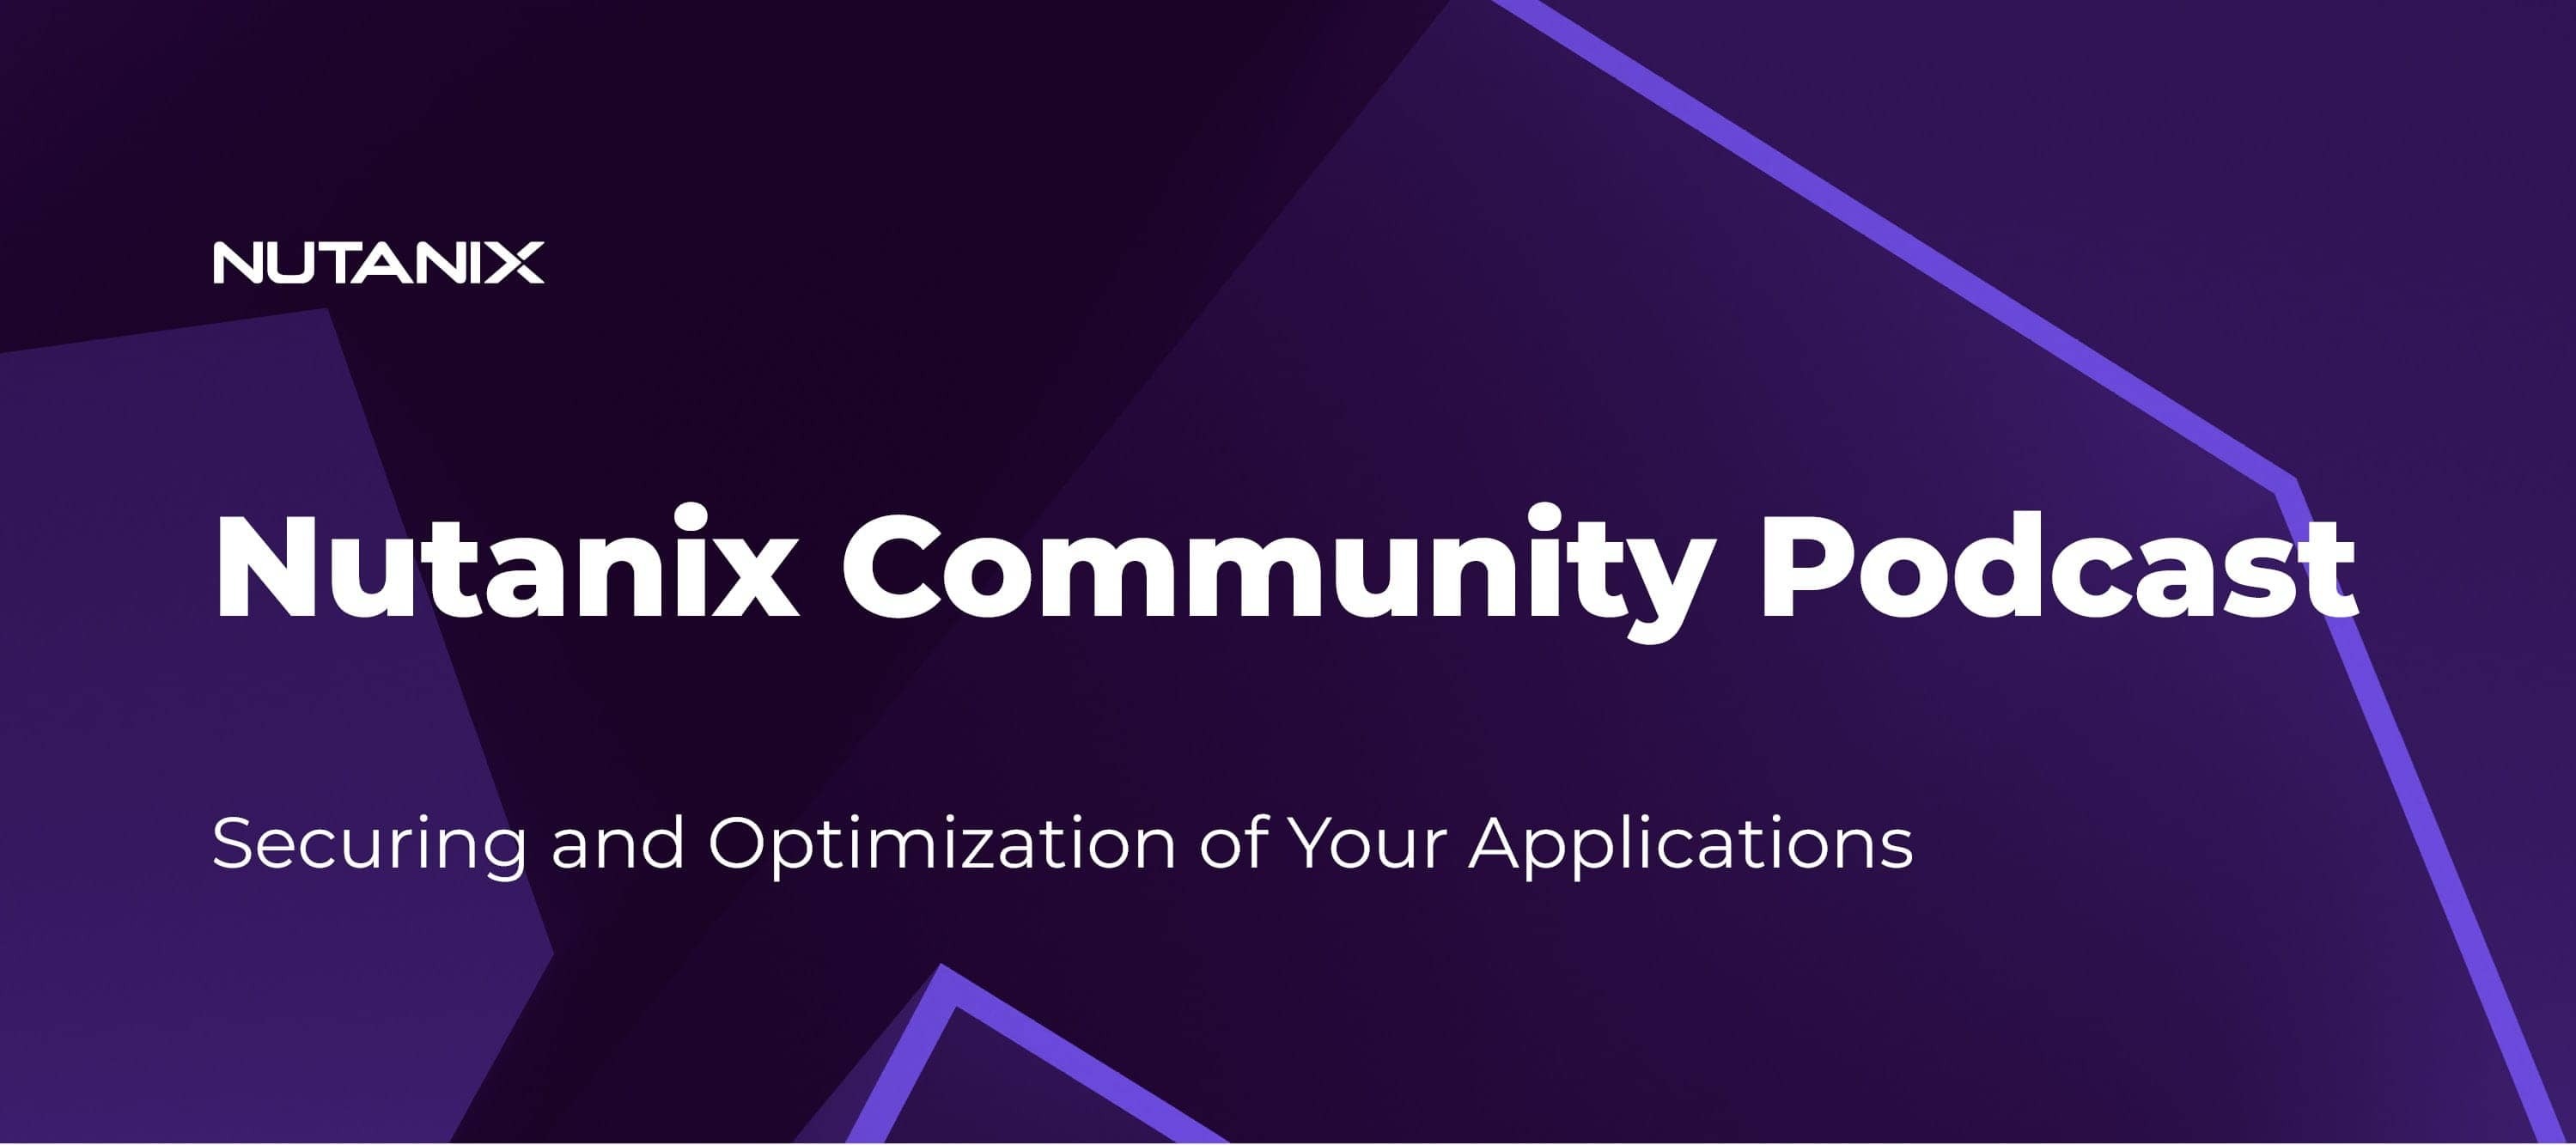 Nutanix Community Podcast: Securing and Optimization of Your Applications